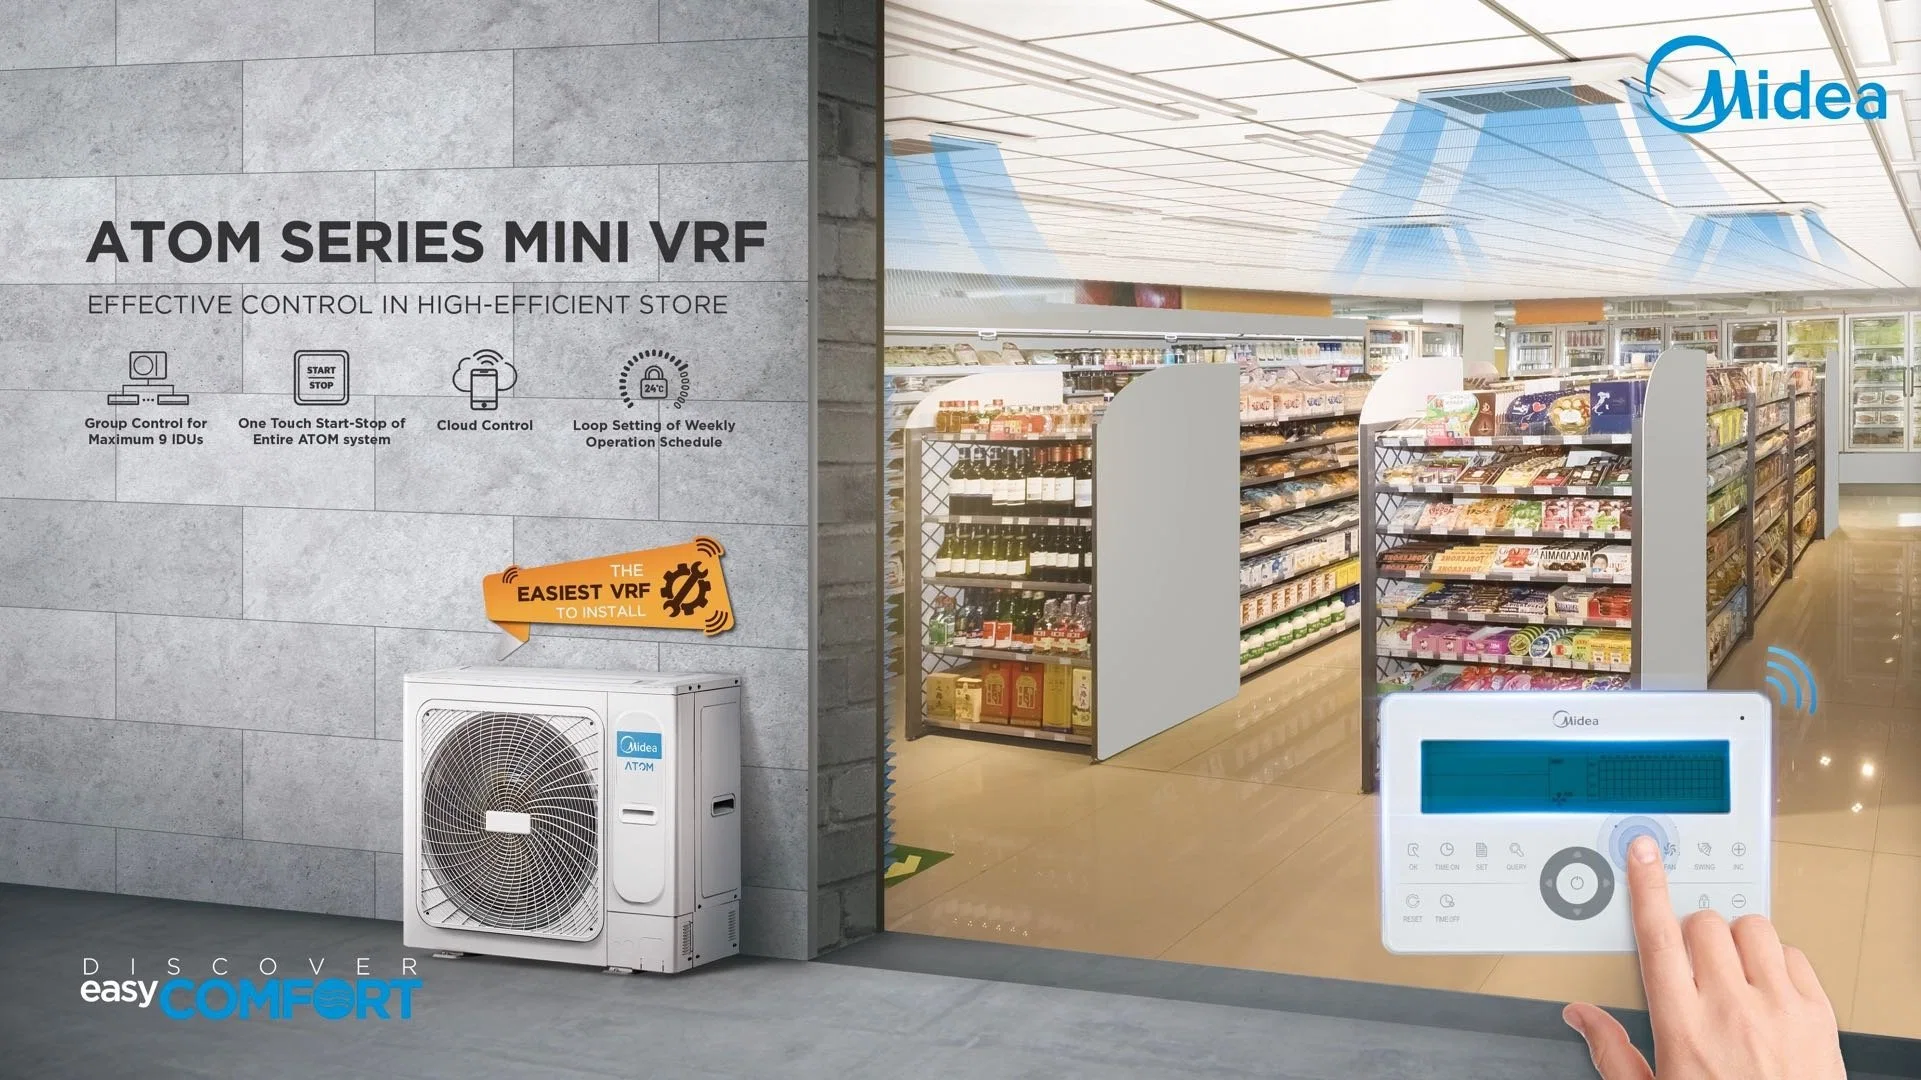 Midea Atom B Series 16kw Light Commercial Mini Vrf Inverter Central Air Conditioner Outdoor Units for Department Store